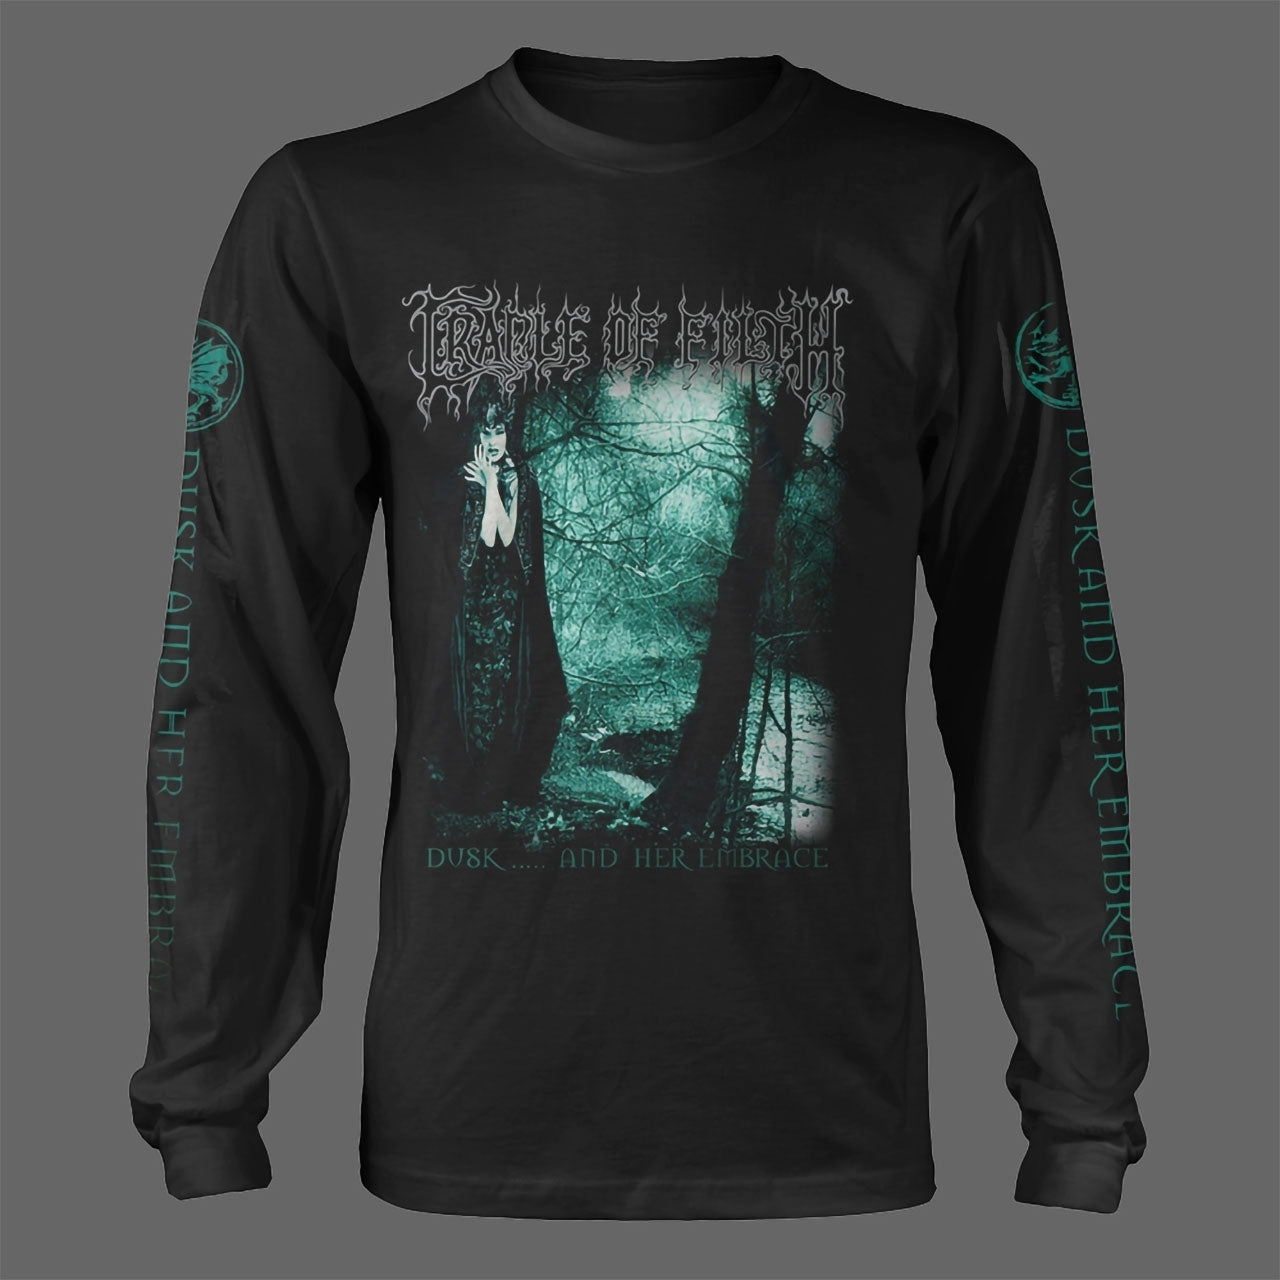 Cradle of Filth - Dusk and Her Embrace (Long Sleeve T-Shirt)